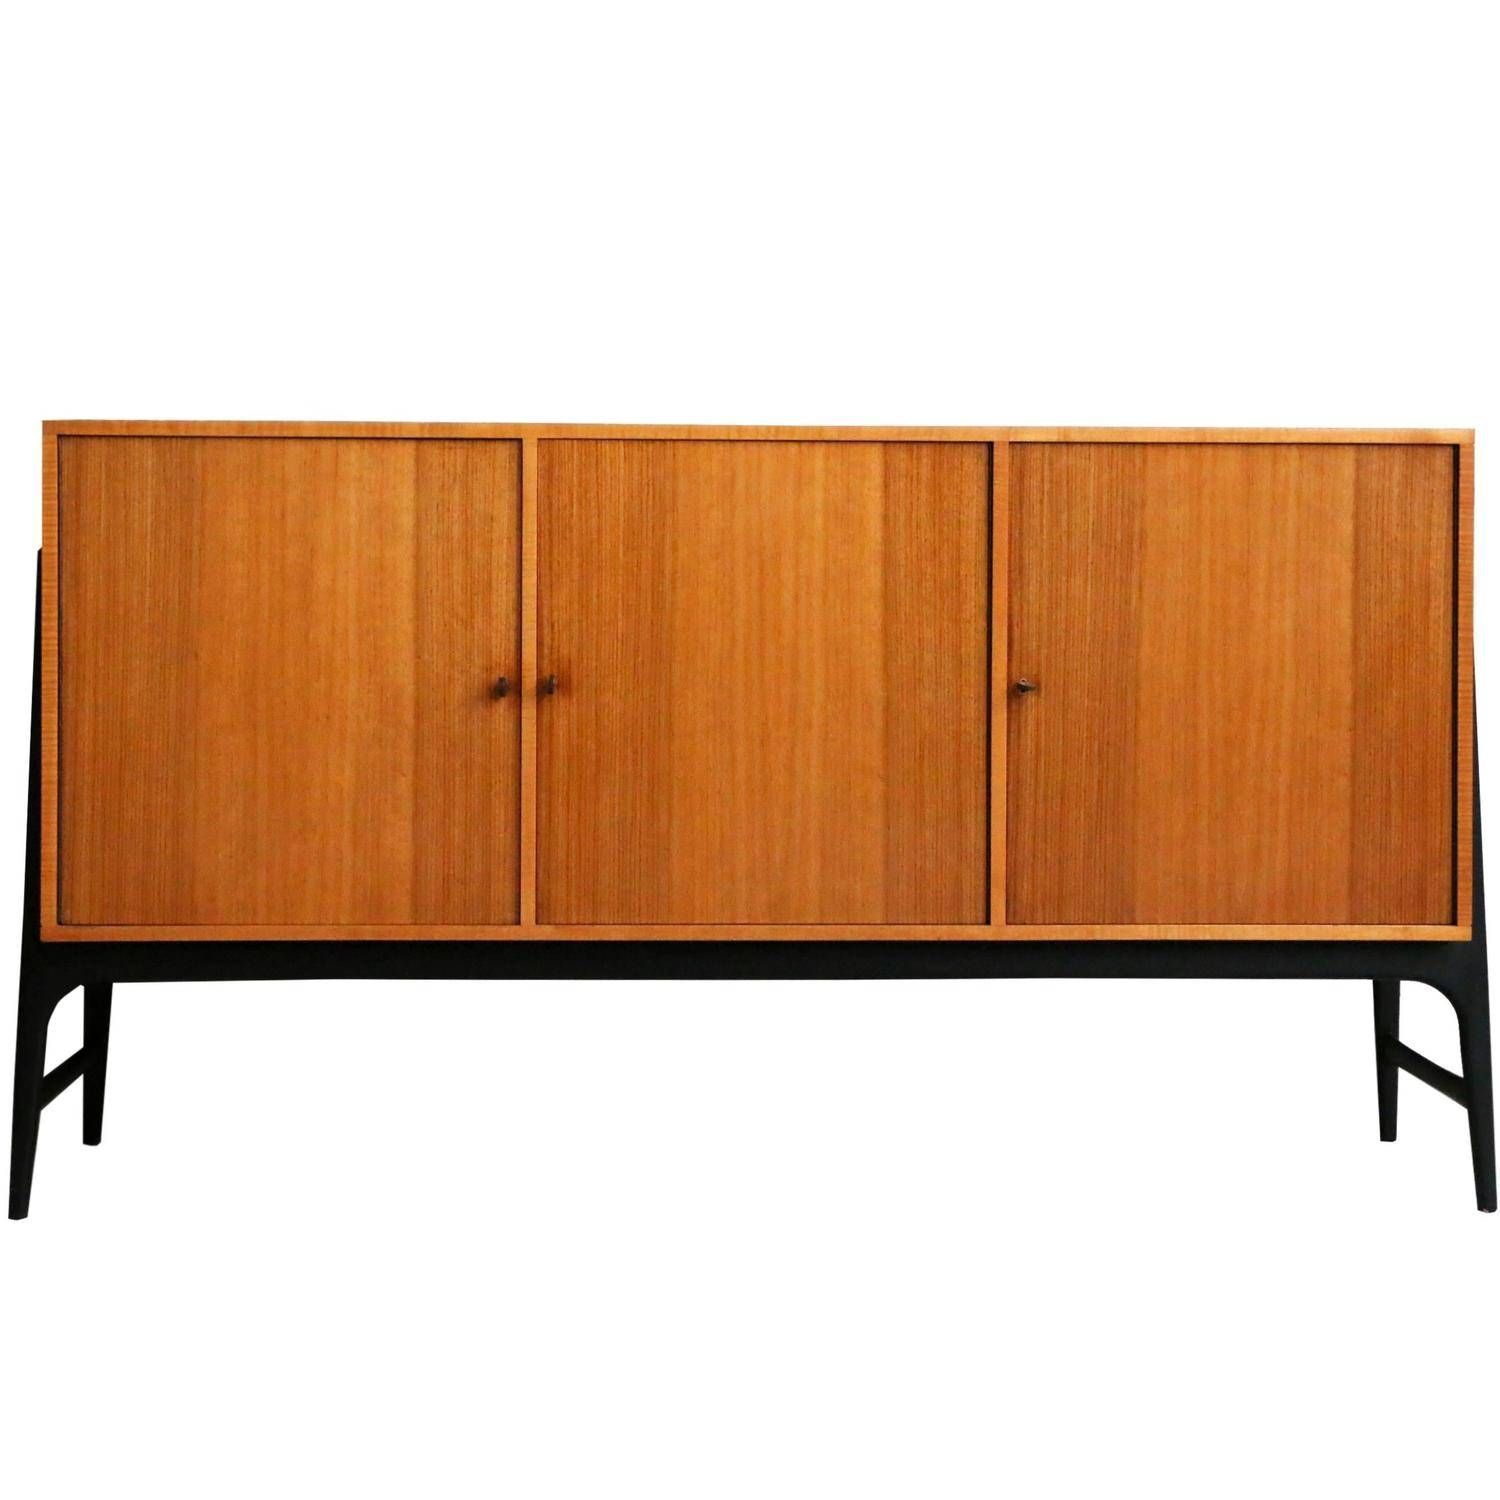 Rare Modernist Sideboardbelgian Architect And Designer Alfred Pertaining To Latest Quirky Sideboards (View 13 of 15)